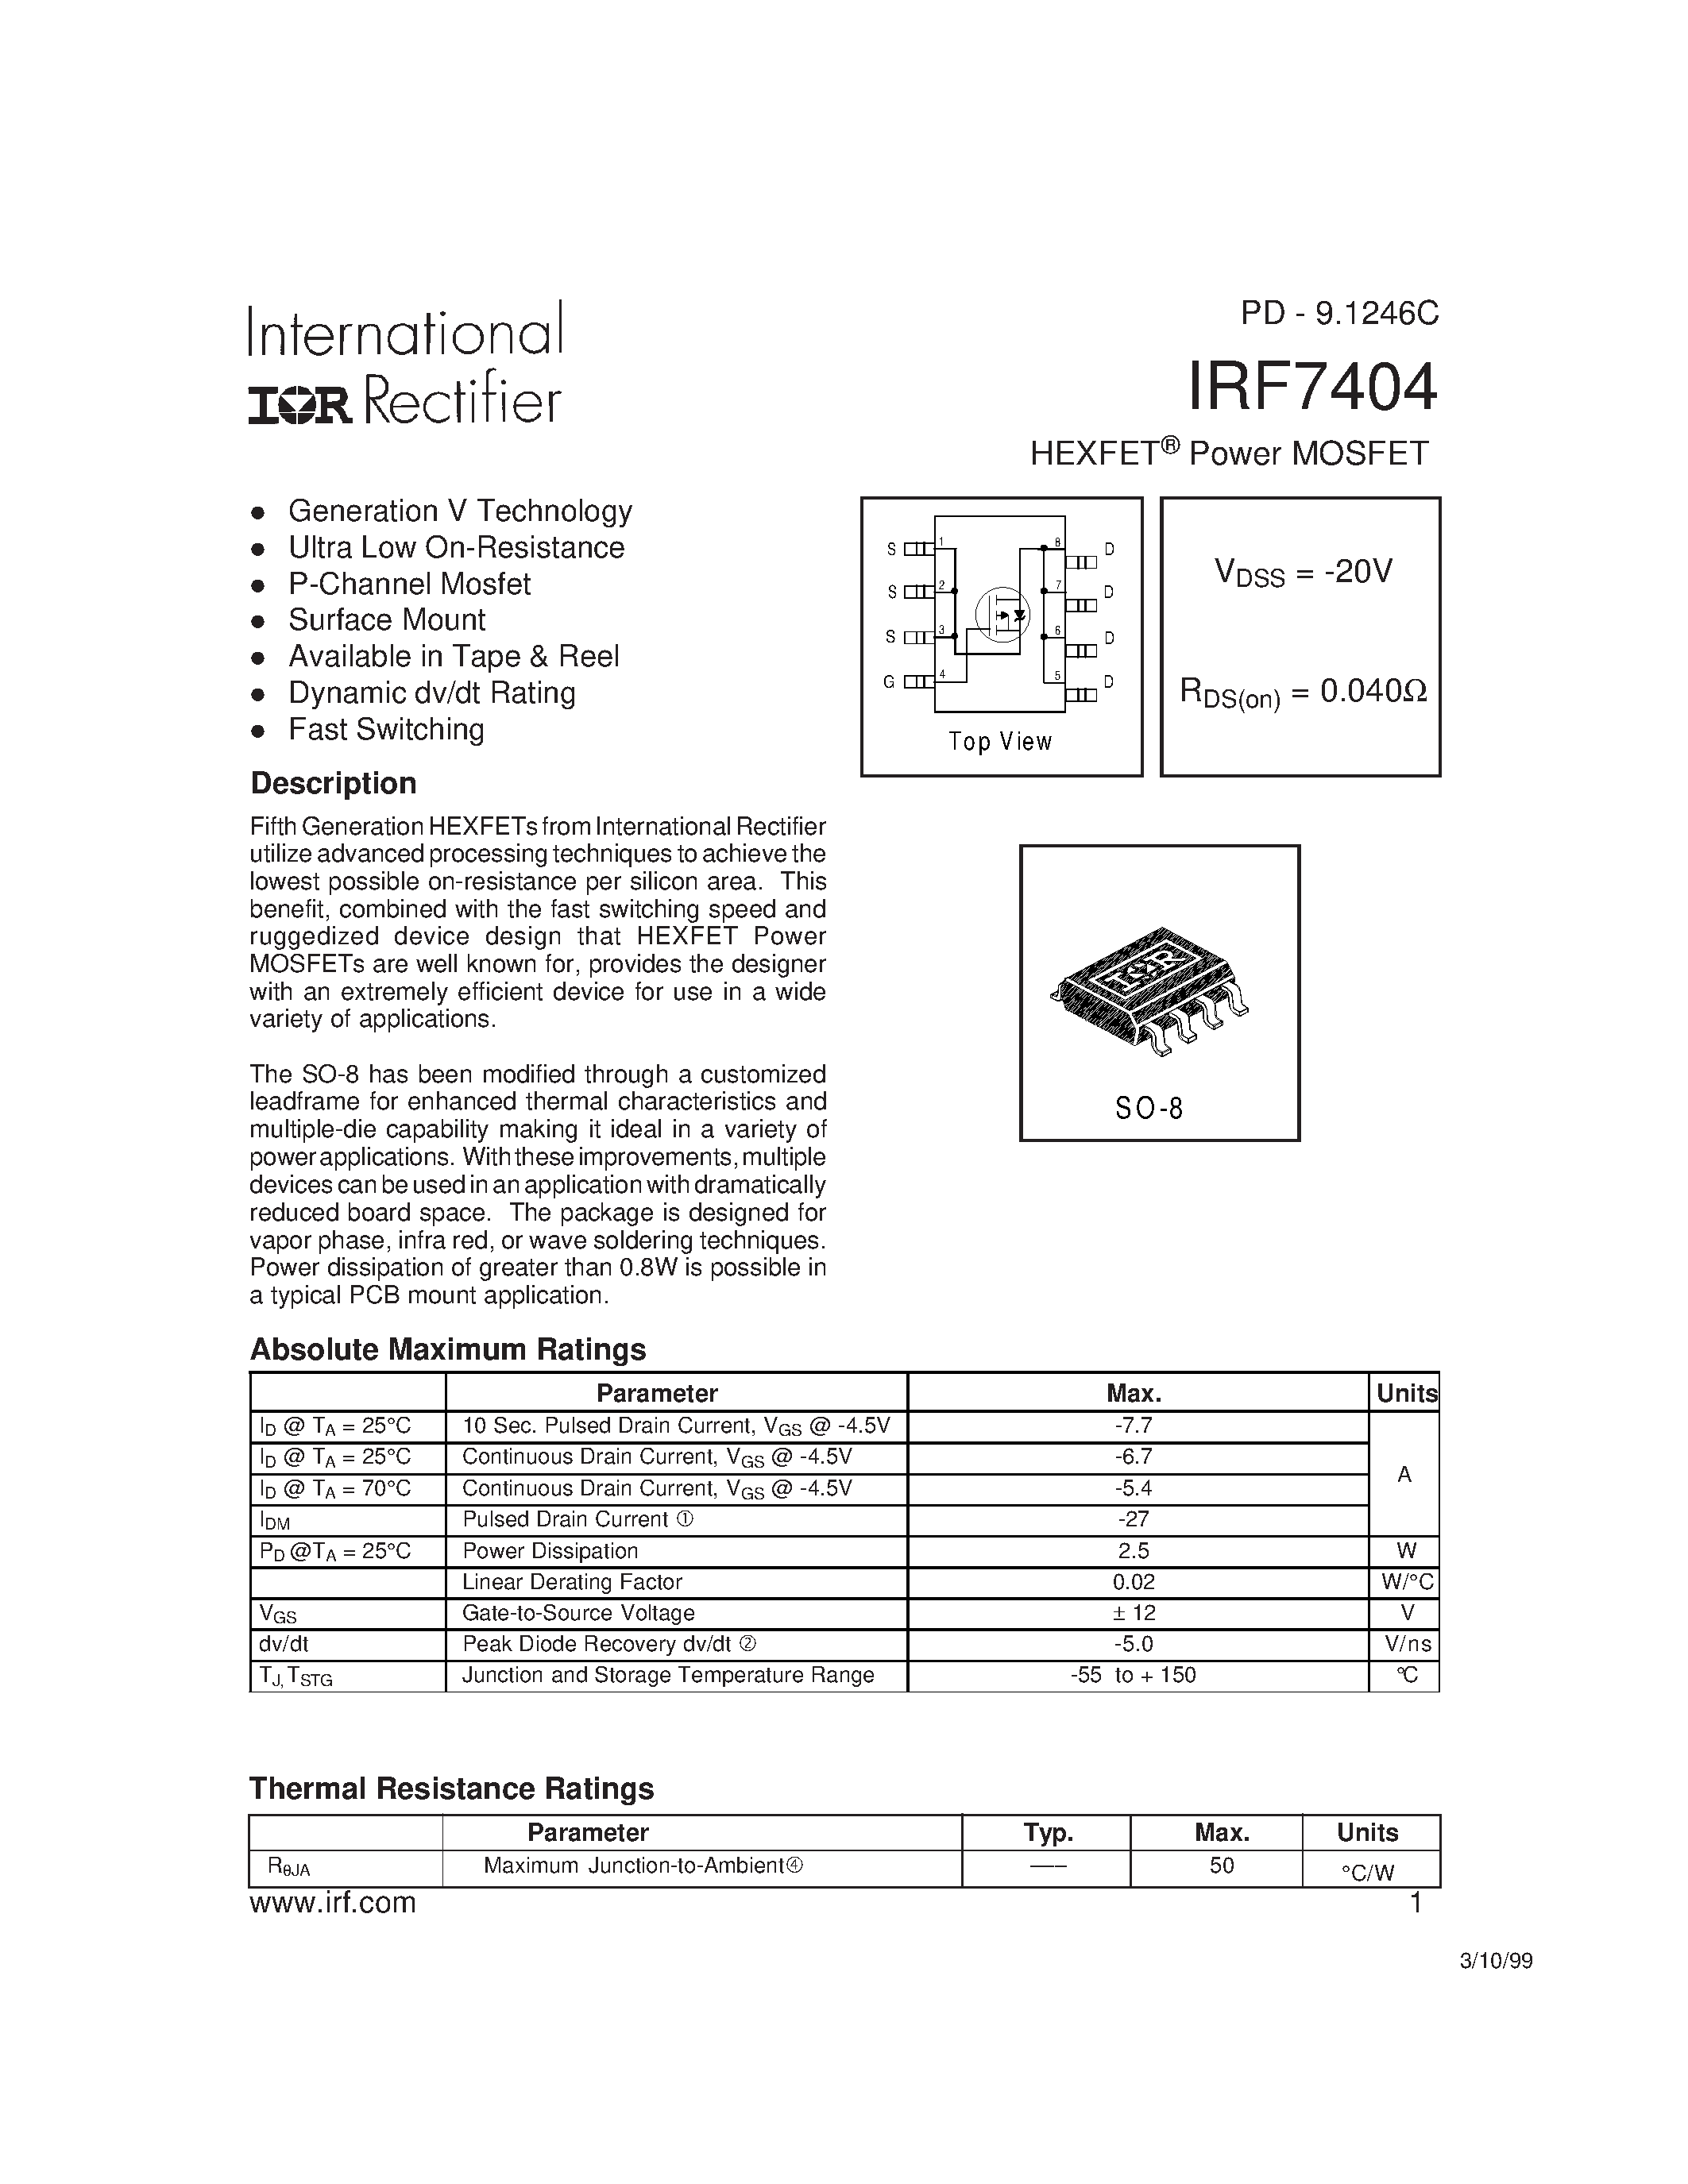 Datasheet IRF7404 - HEXFET Power MOSFET page 1